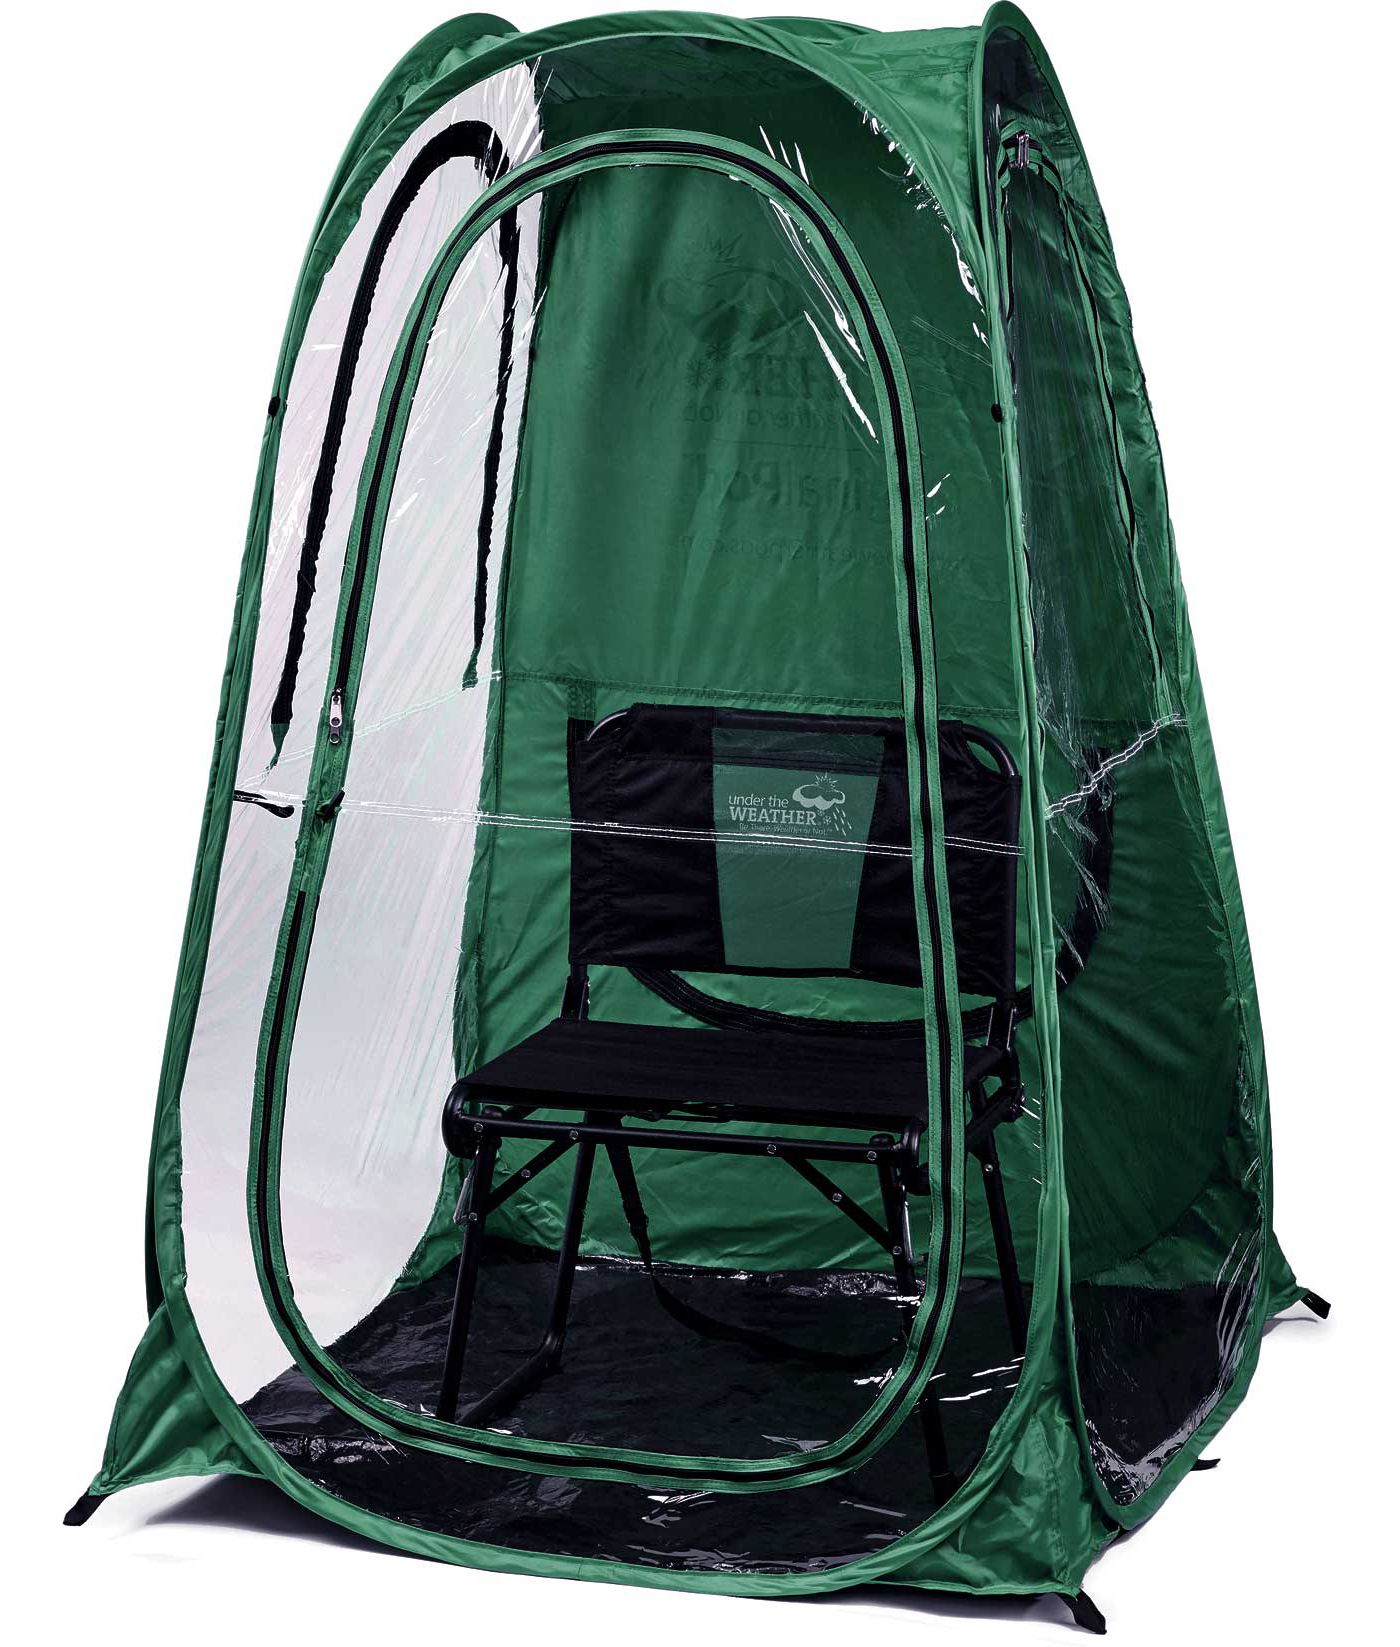 under the weather pop up chair tent